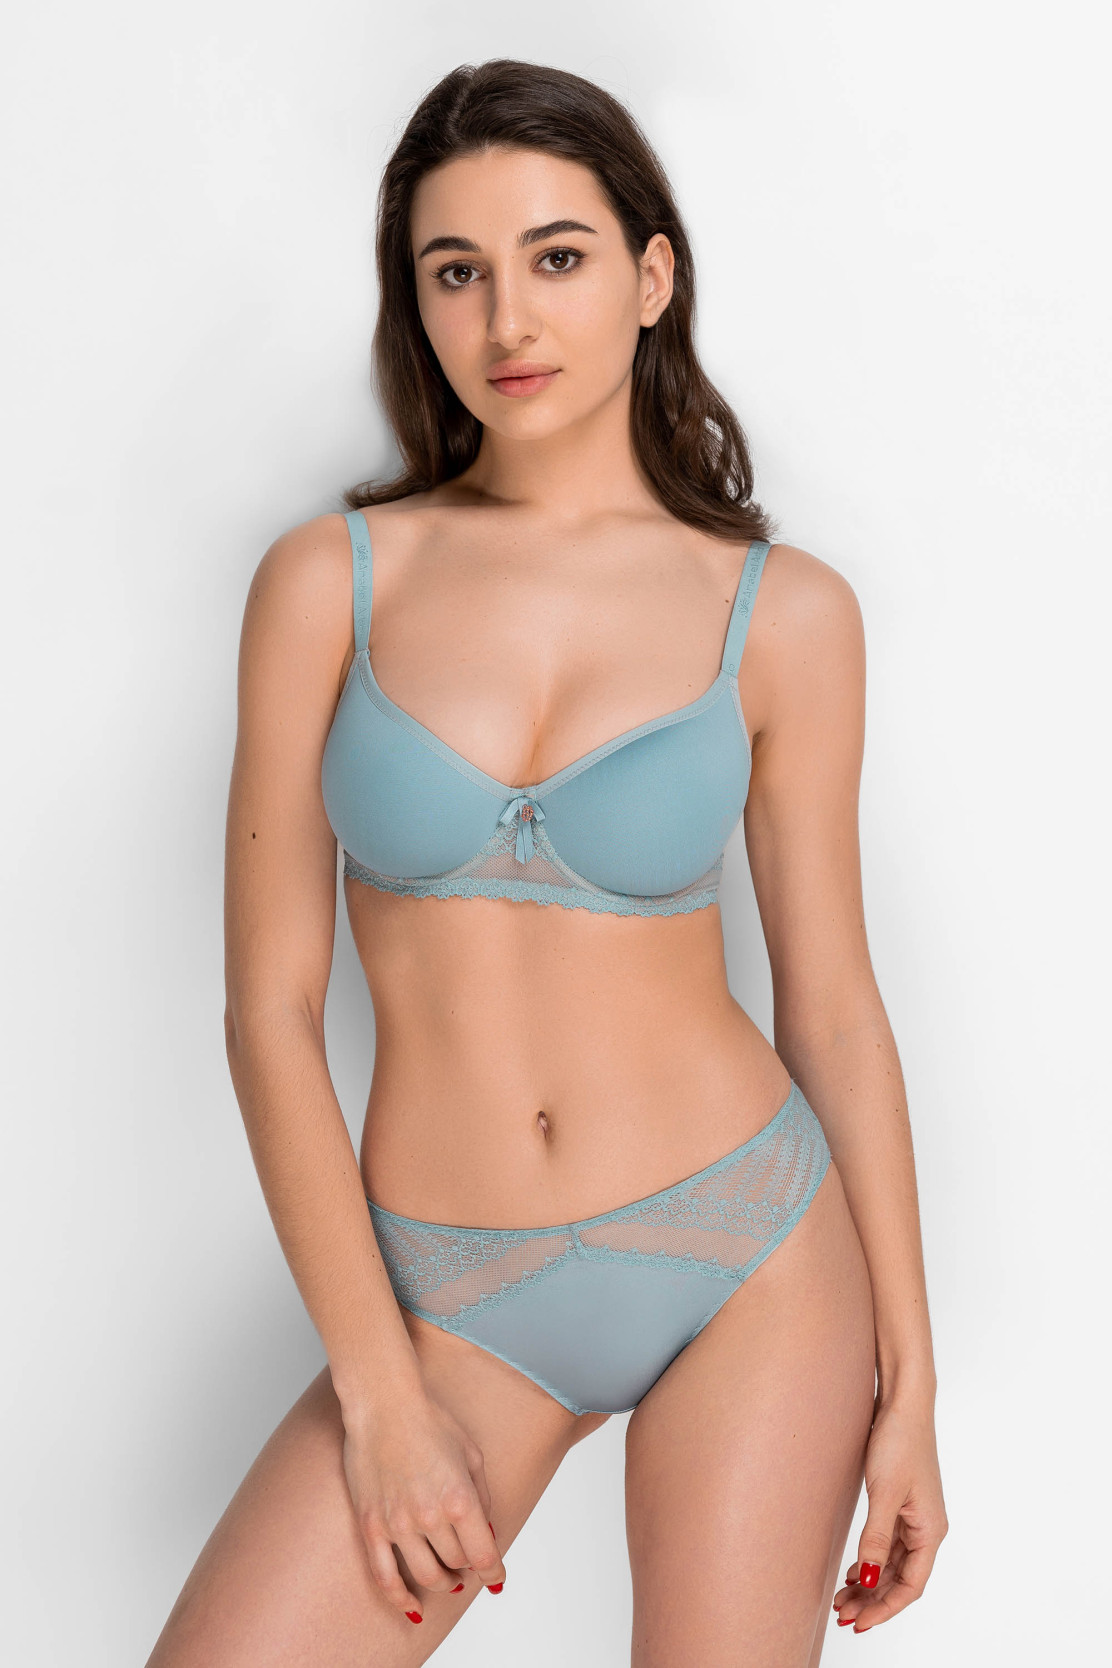 Explore the Top Lingerie Shops in Dwarka - Jd Collections